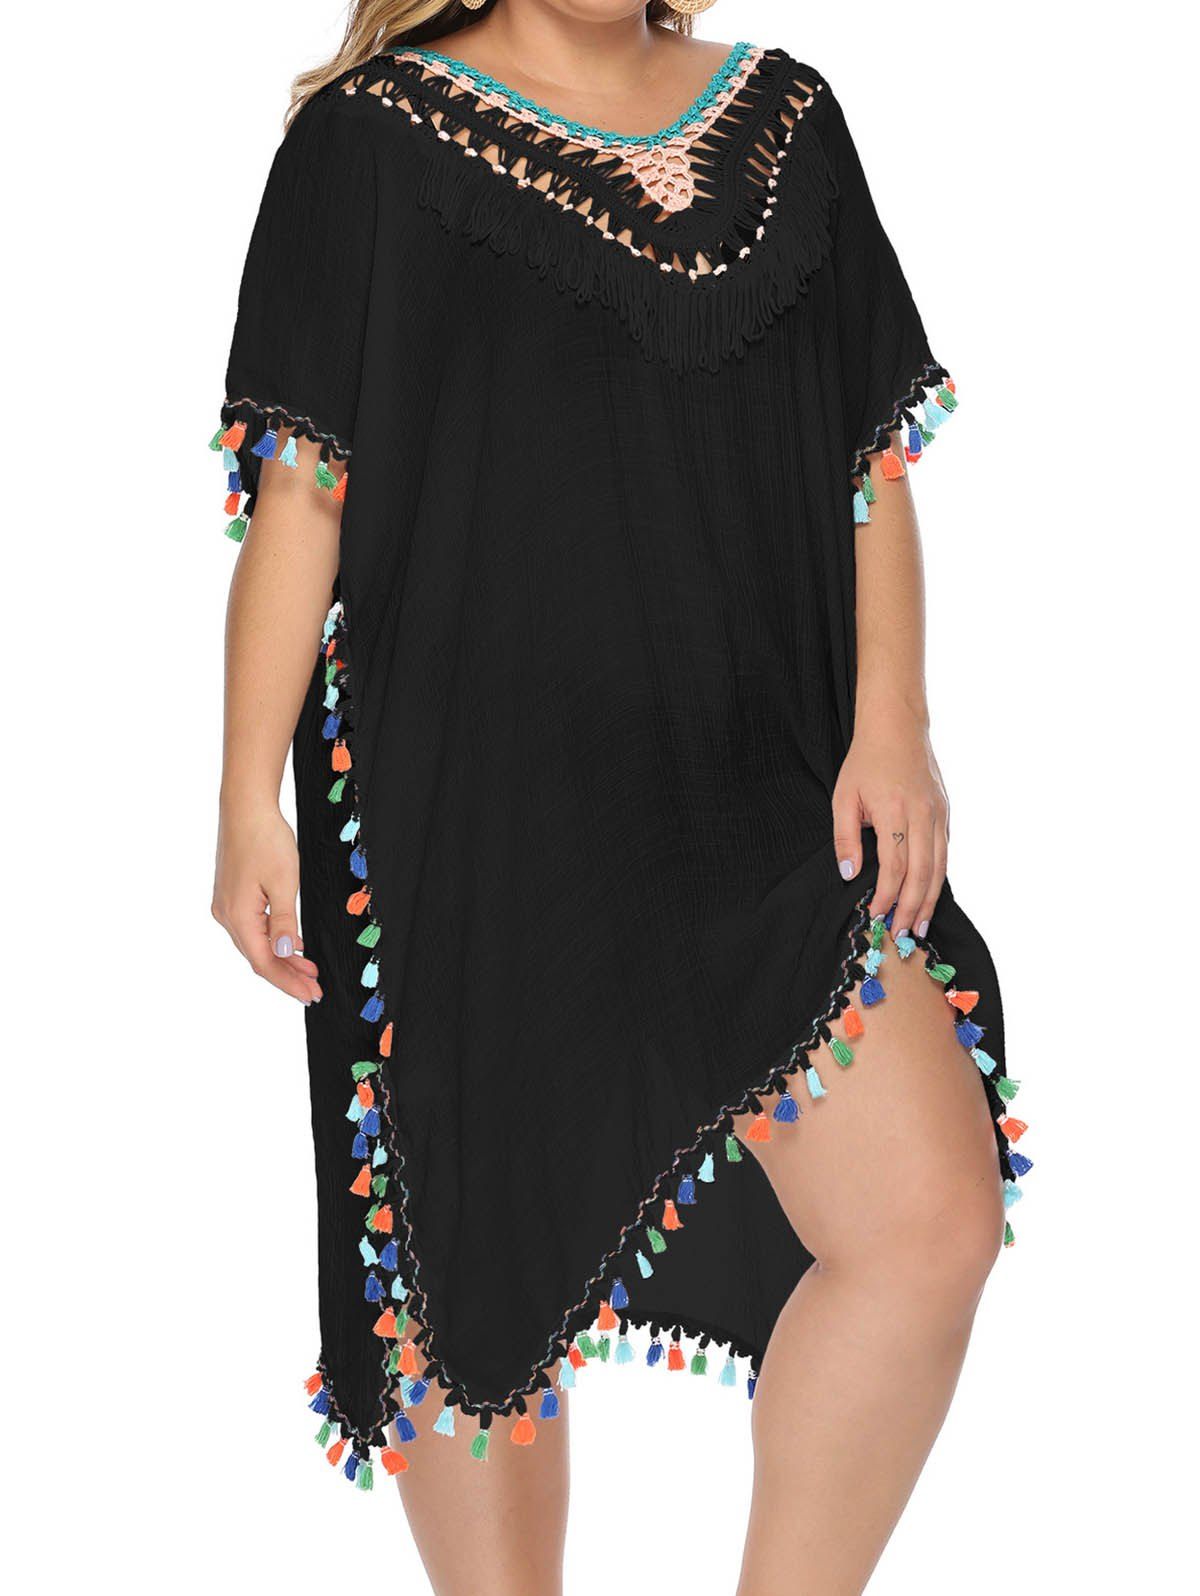 Plus Size Cover-up Crochet Colored Tassel Cover-up Dress Hollow Out Slit Short Sleeve Vacation Cover-up Dress - BLACK 2XL